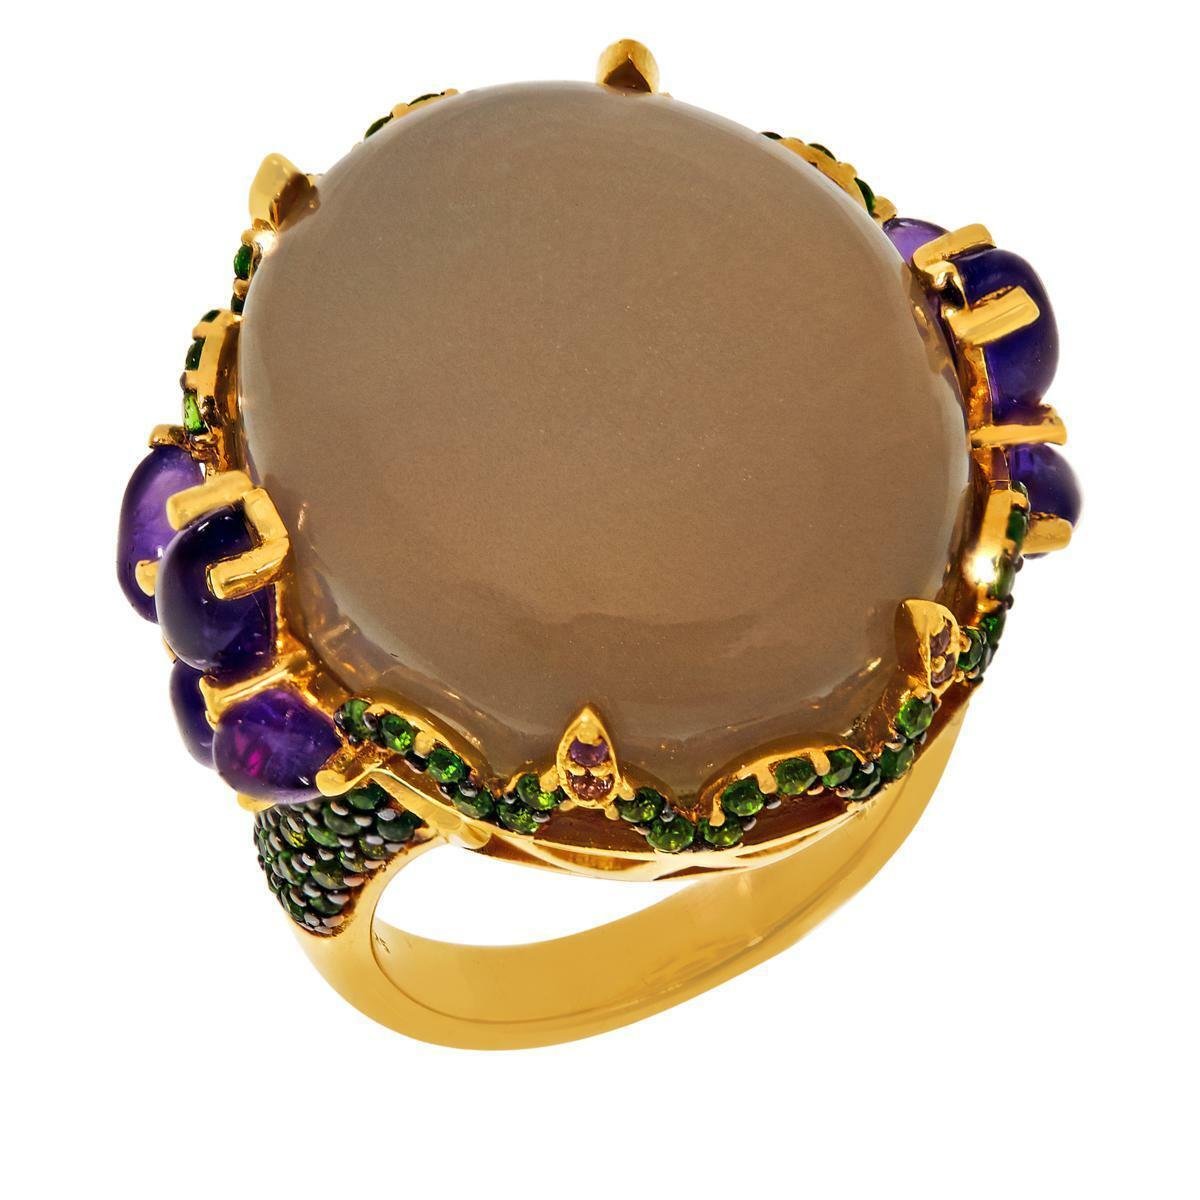 Colleen Lopez Gold-Plated Moonstone, Chrome Diopside and Amethyst Ring, Size 7